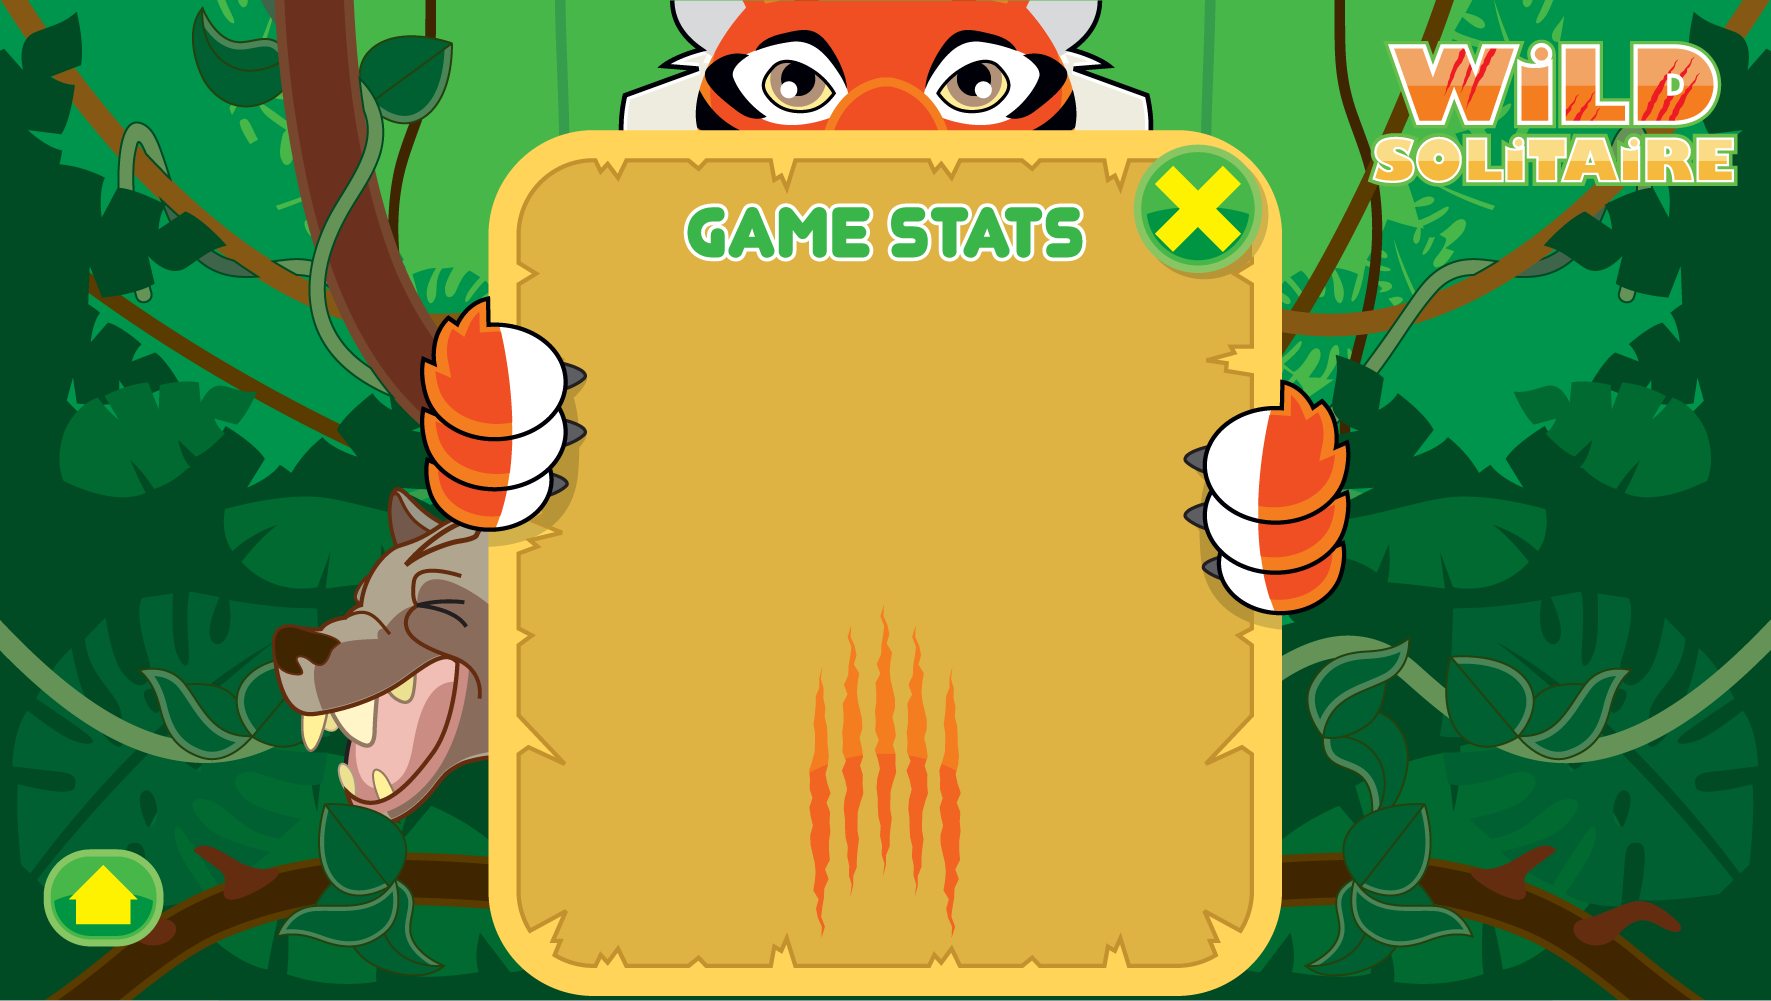 Wild Solitaire Game Stats Screen